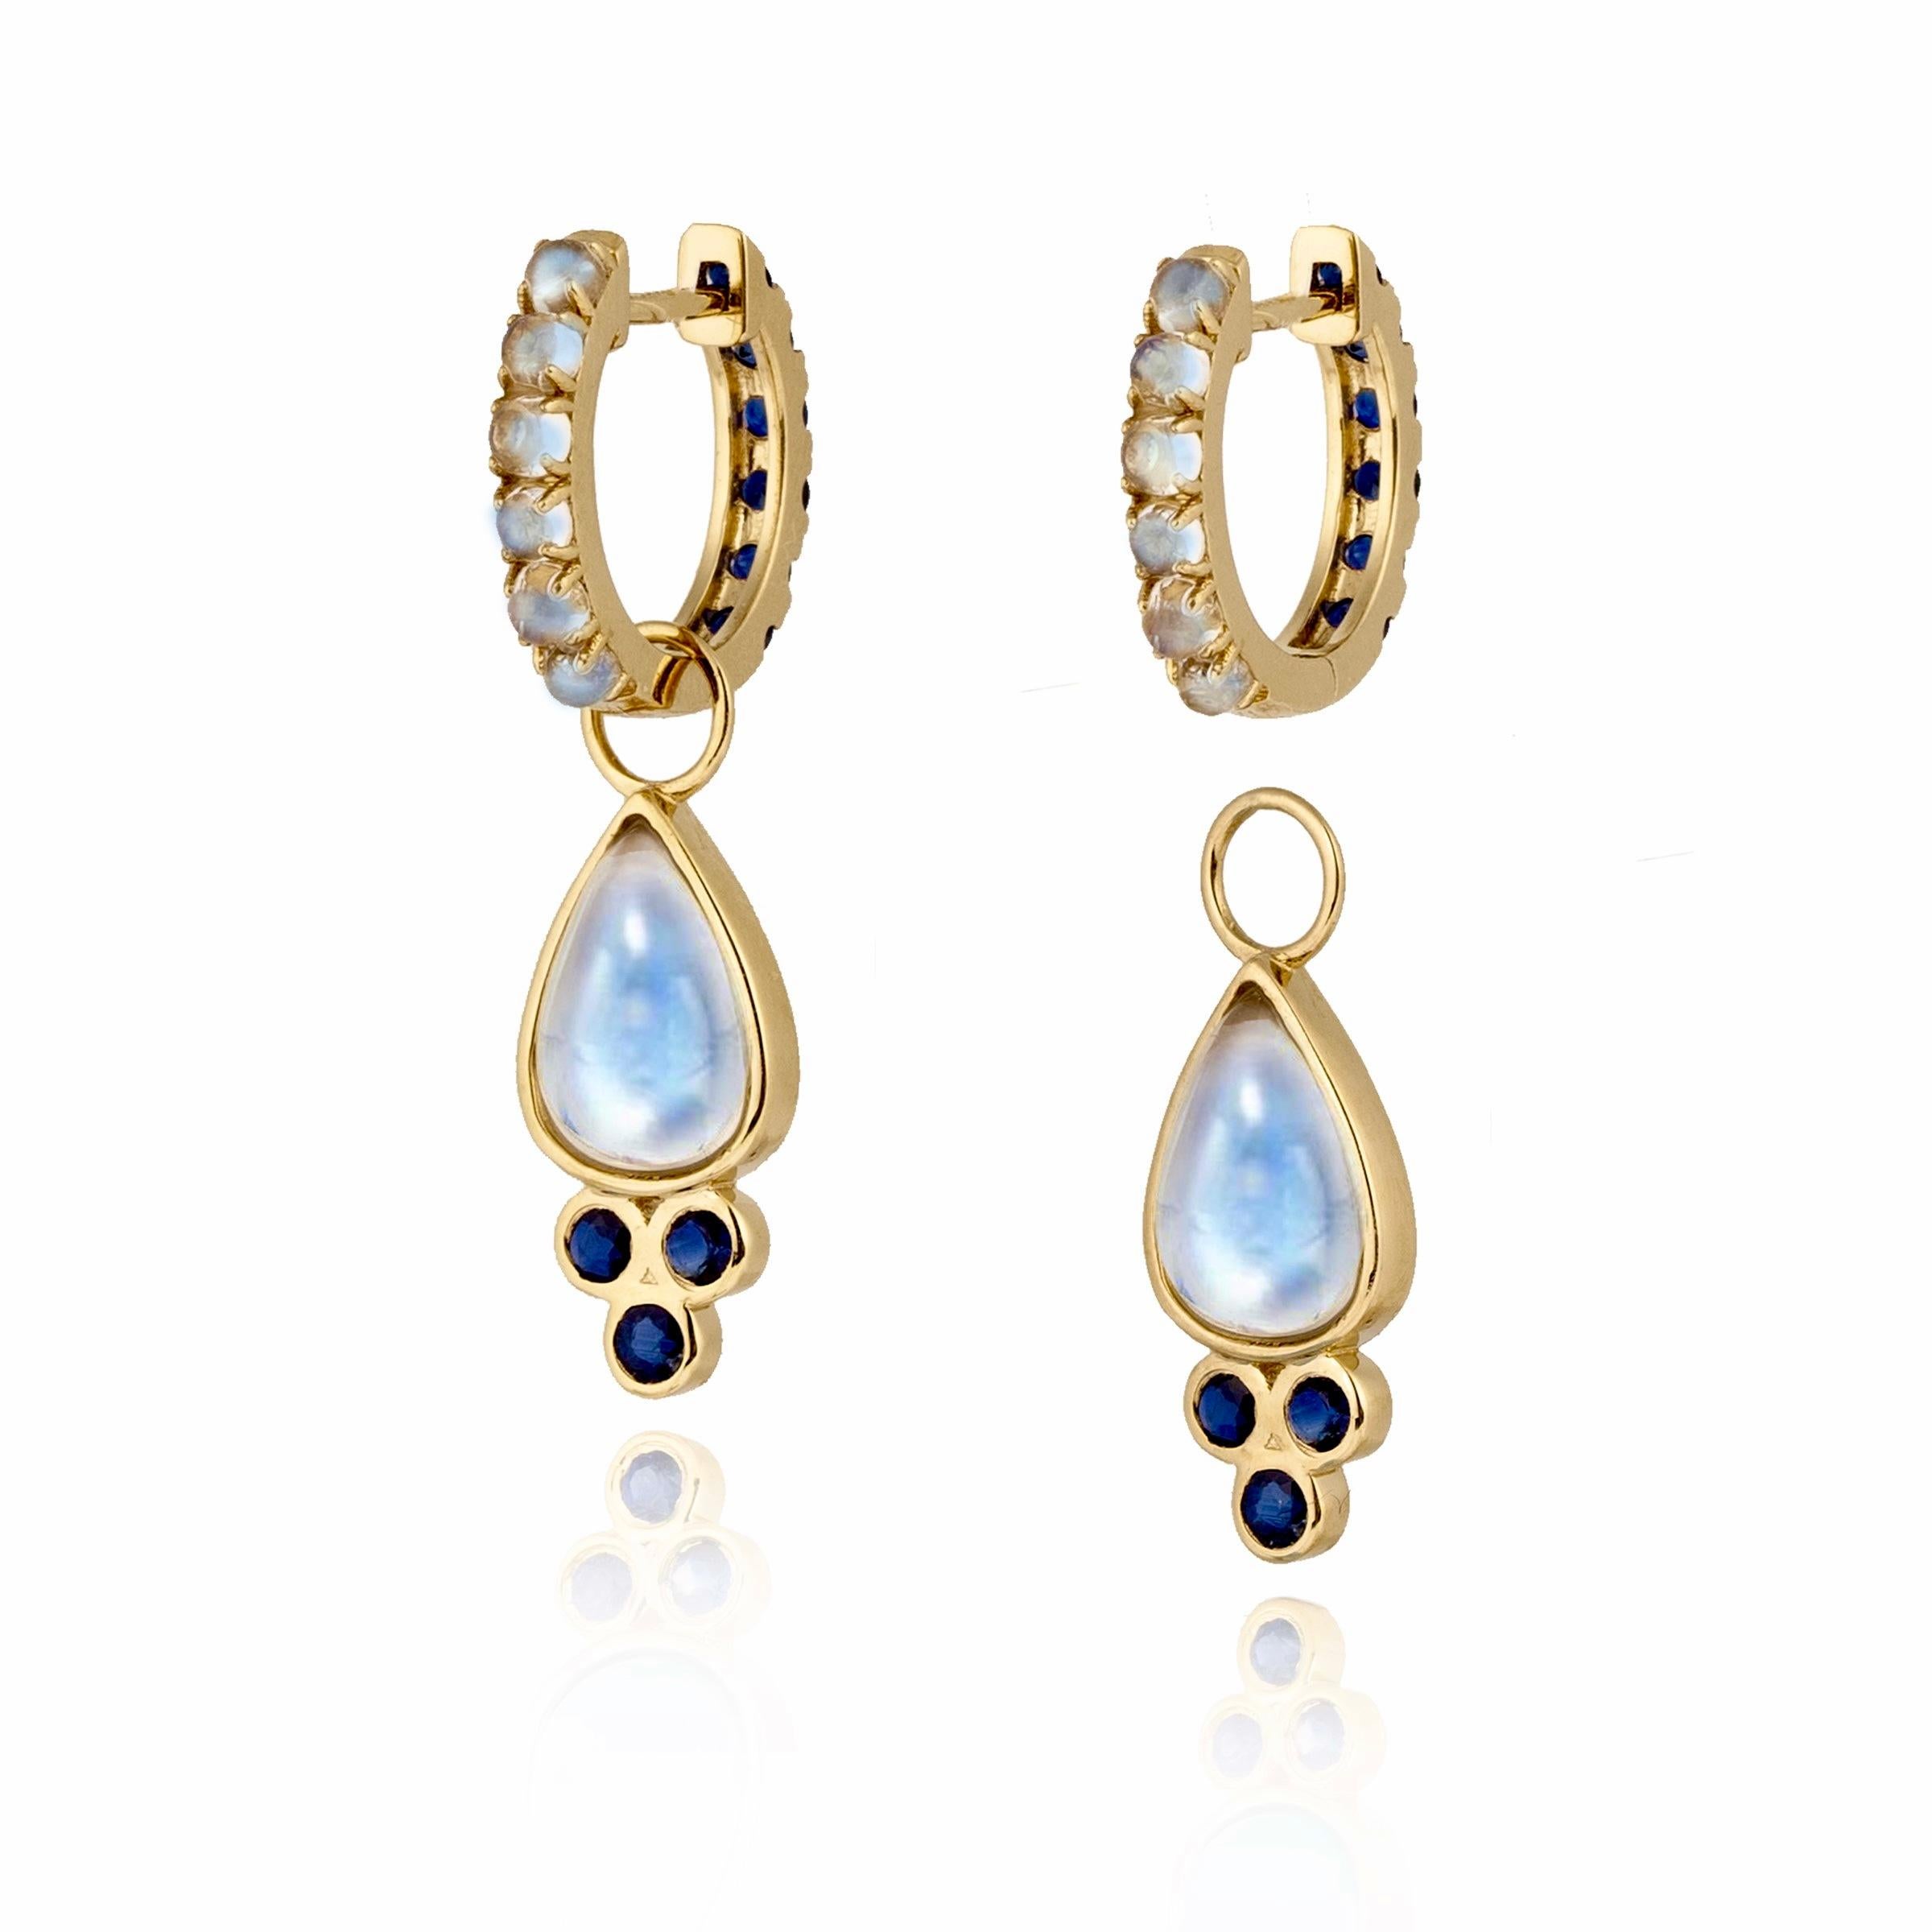 Discover Nina Zhou Sapphire and Moonstone Double-sided Hoop Earrings with Drop Enhancers. These exquisite earrings redefine elegance, featuring a stunning combination of sapphires and moonstone on both sides for a versatile look that's both playful